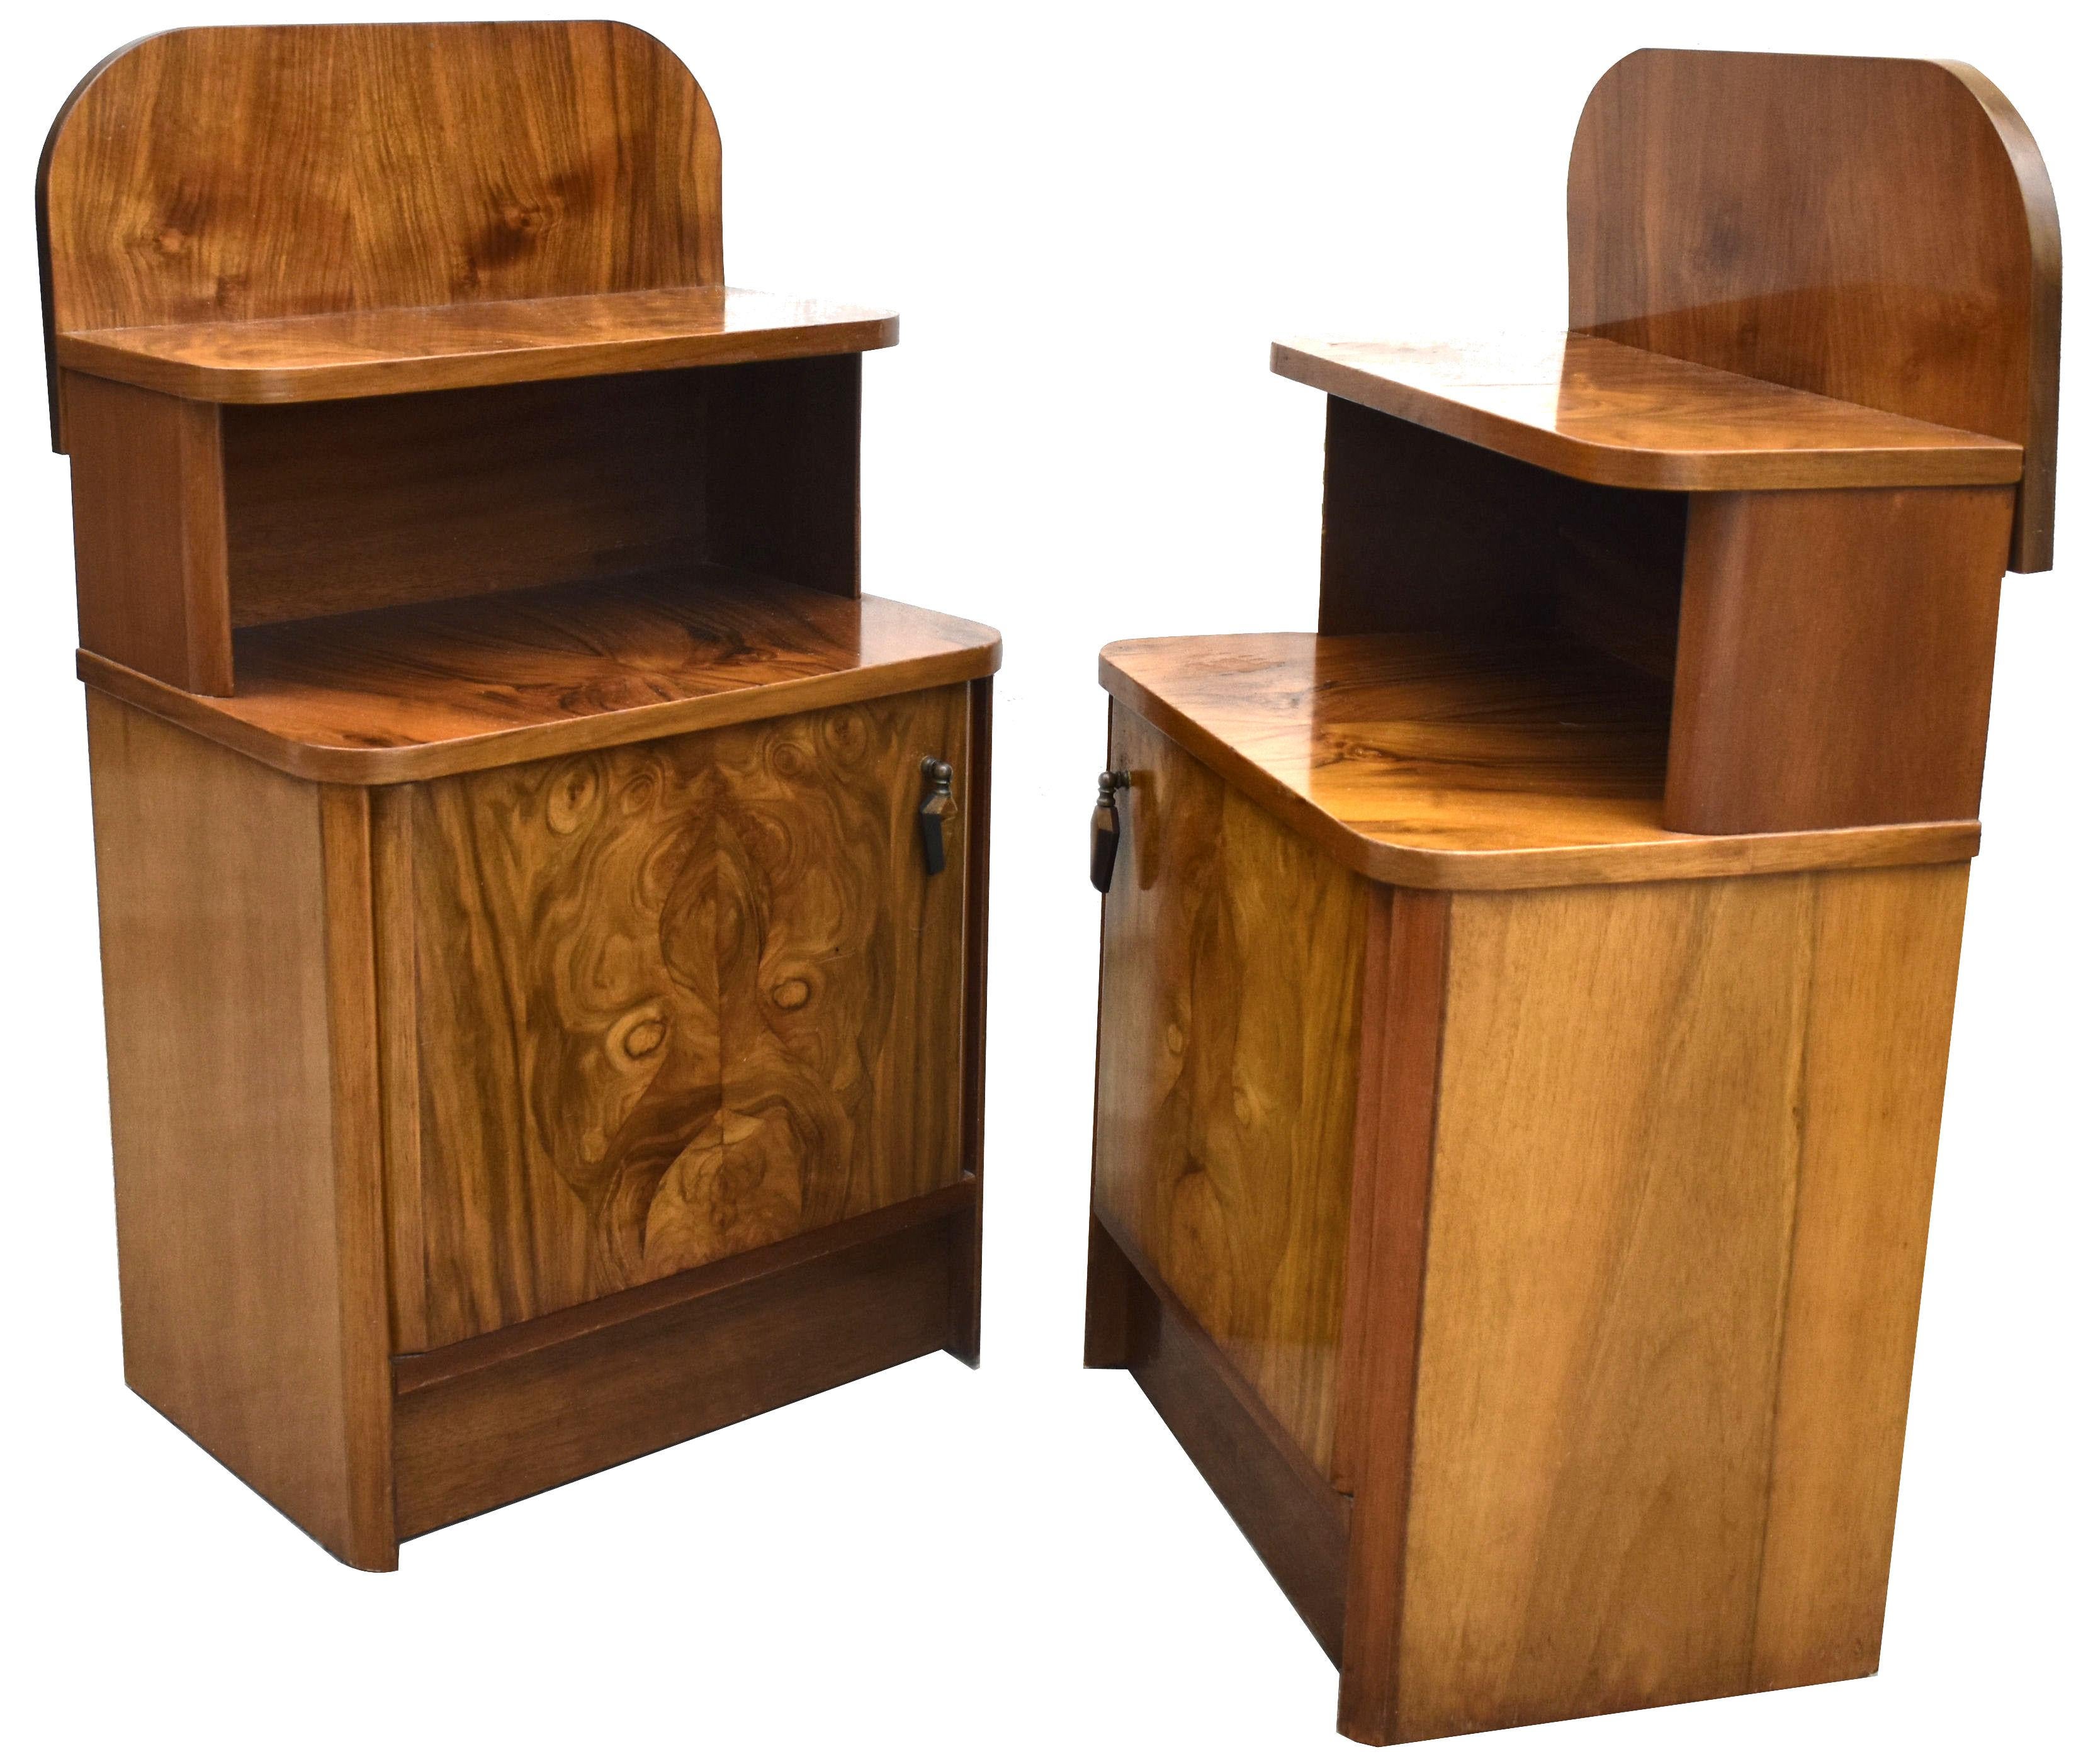 English Art Deco Pair of Nightstands, Bedside Table Cabinets in Walnut, England, c1930 For Sale